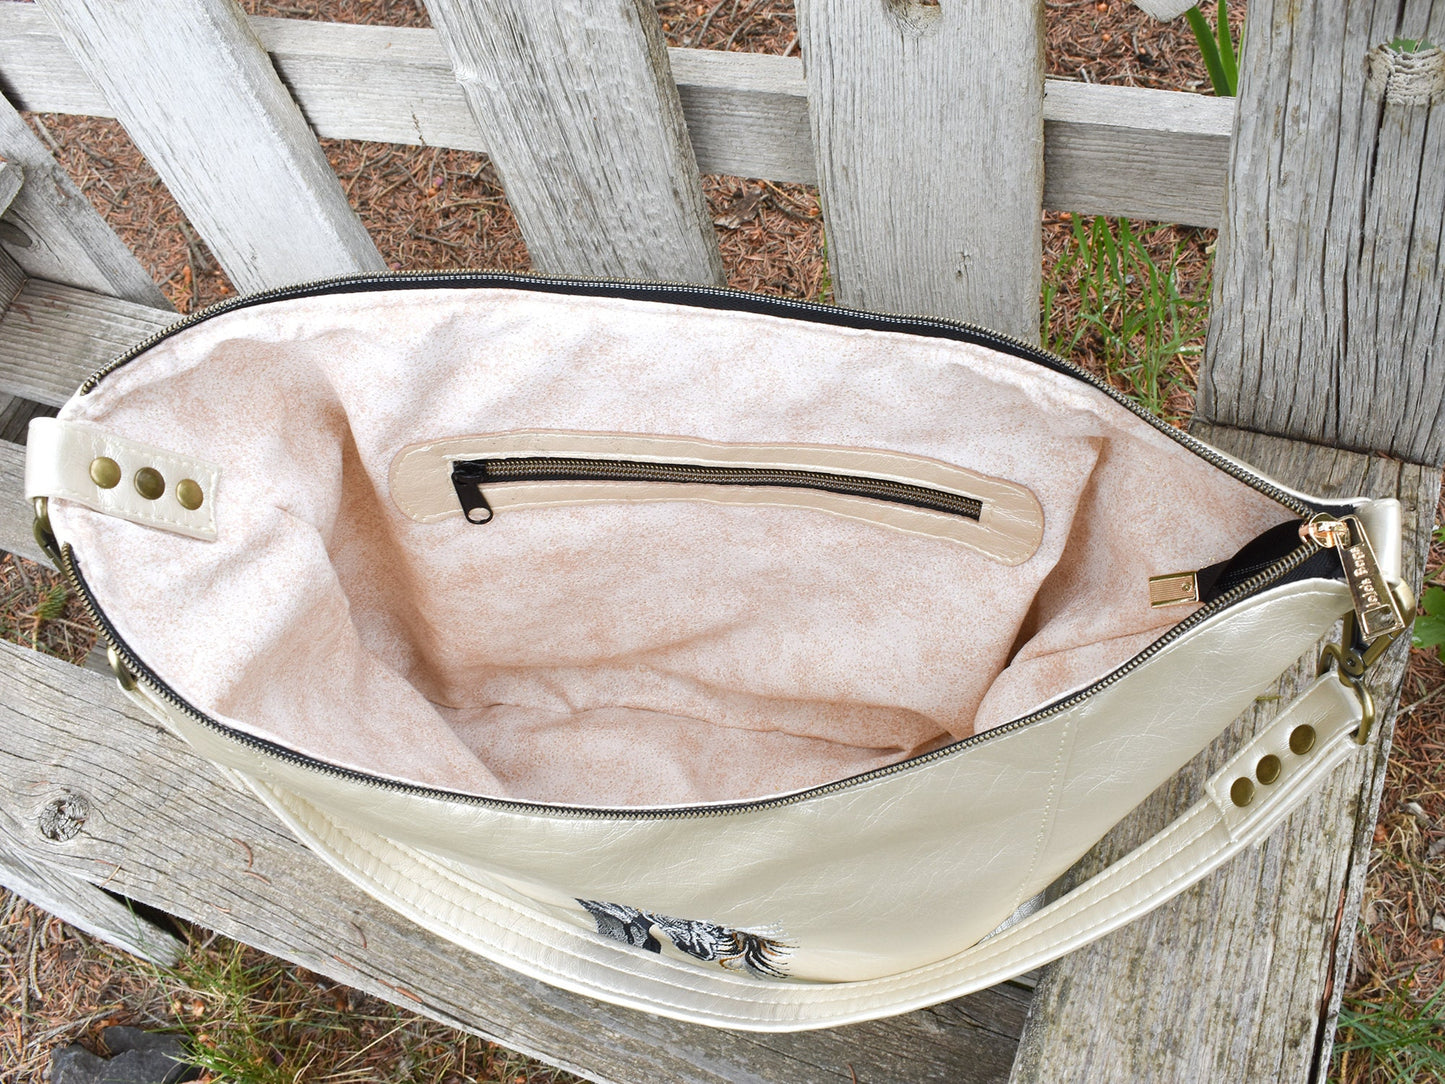 Conceal Carry Hobo Style Purse - Modern Style Shoulder Bag - Gift for a Gun Lover - Right or Left Carry CC or CCW